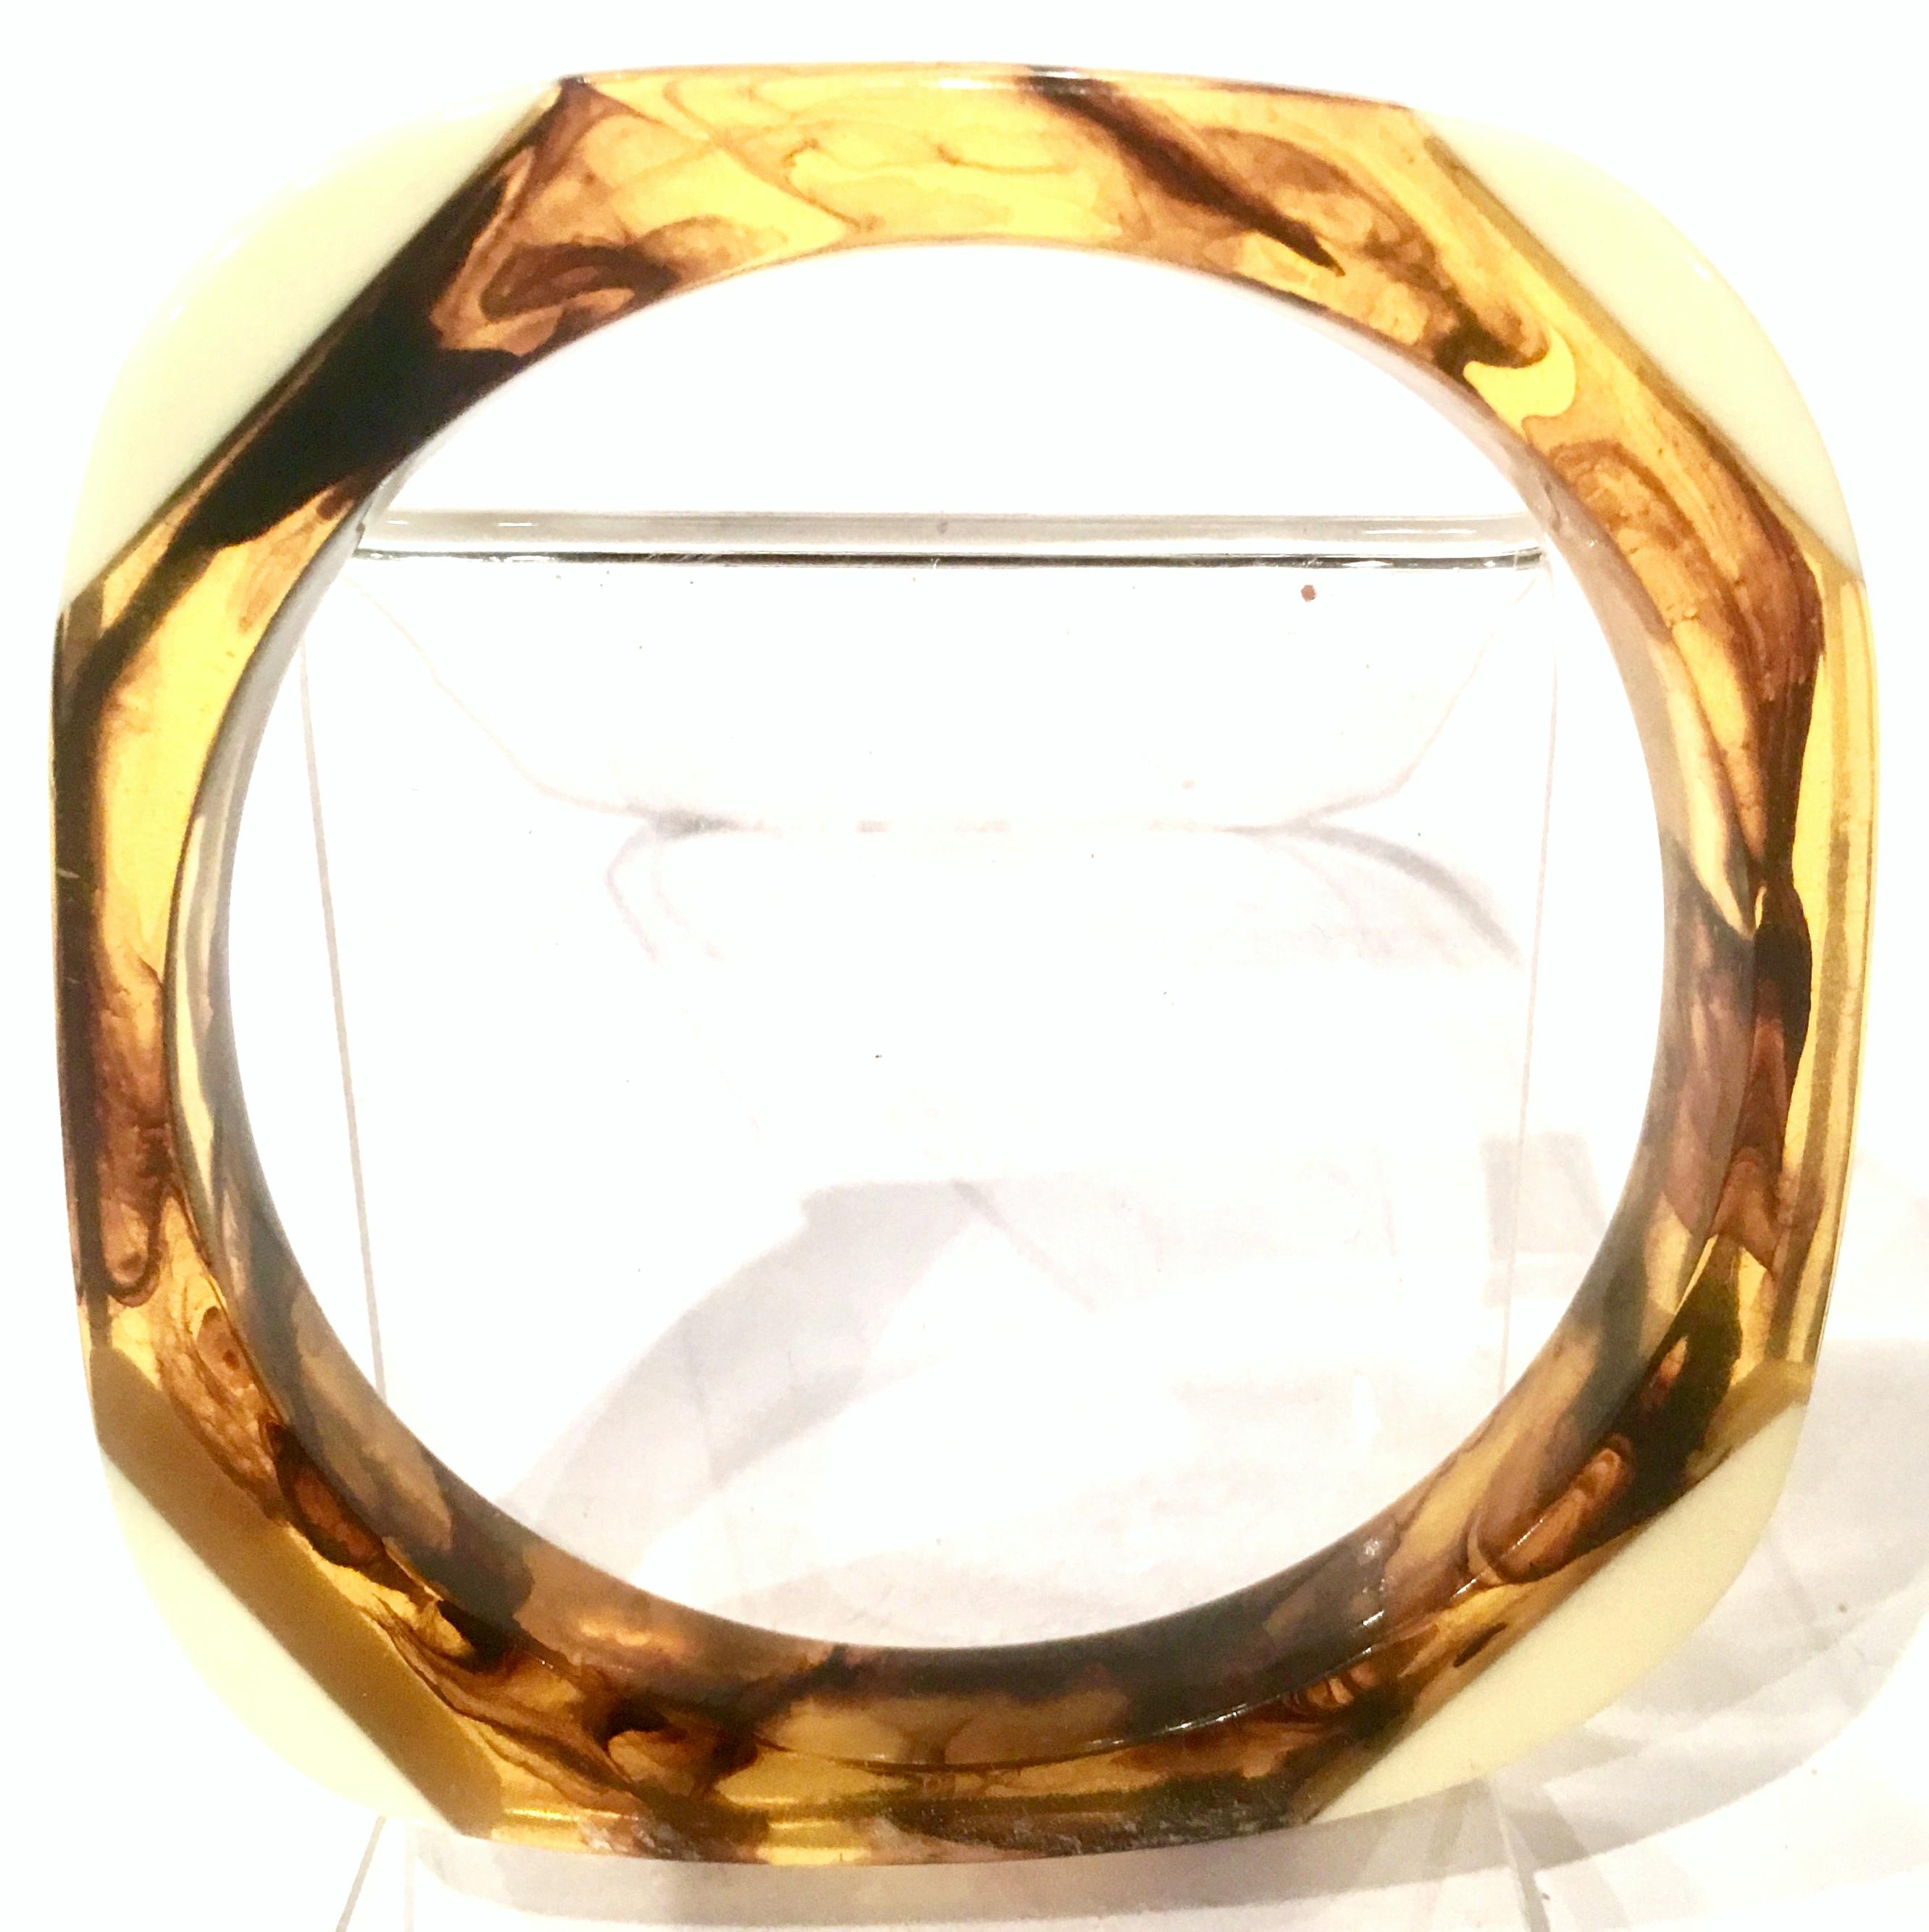 Mid-20th Century Lucite Faux Ivory & Tortoise Shell Square and Round Bangle Bracelet. This rare and coveted shaped bracelet features Lucite faux ivory with tortoise shell. Interior diameter measures, 2.5